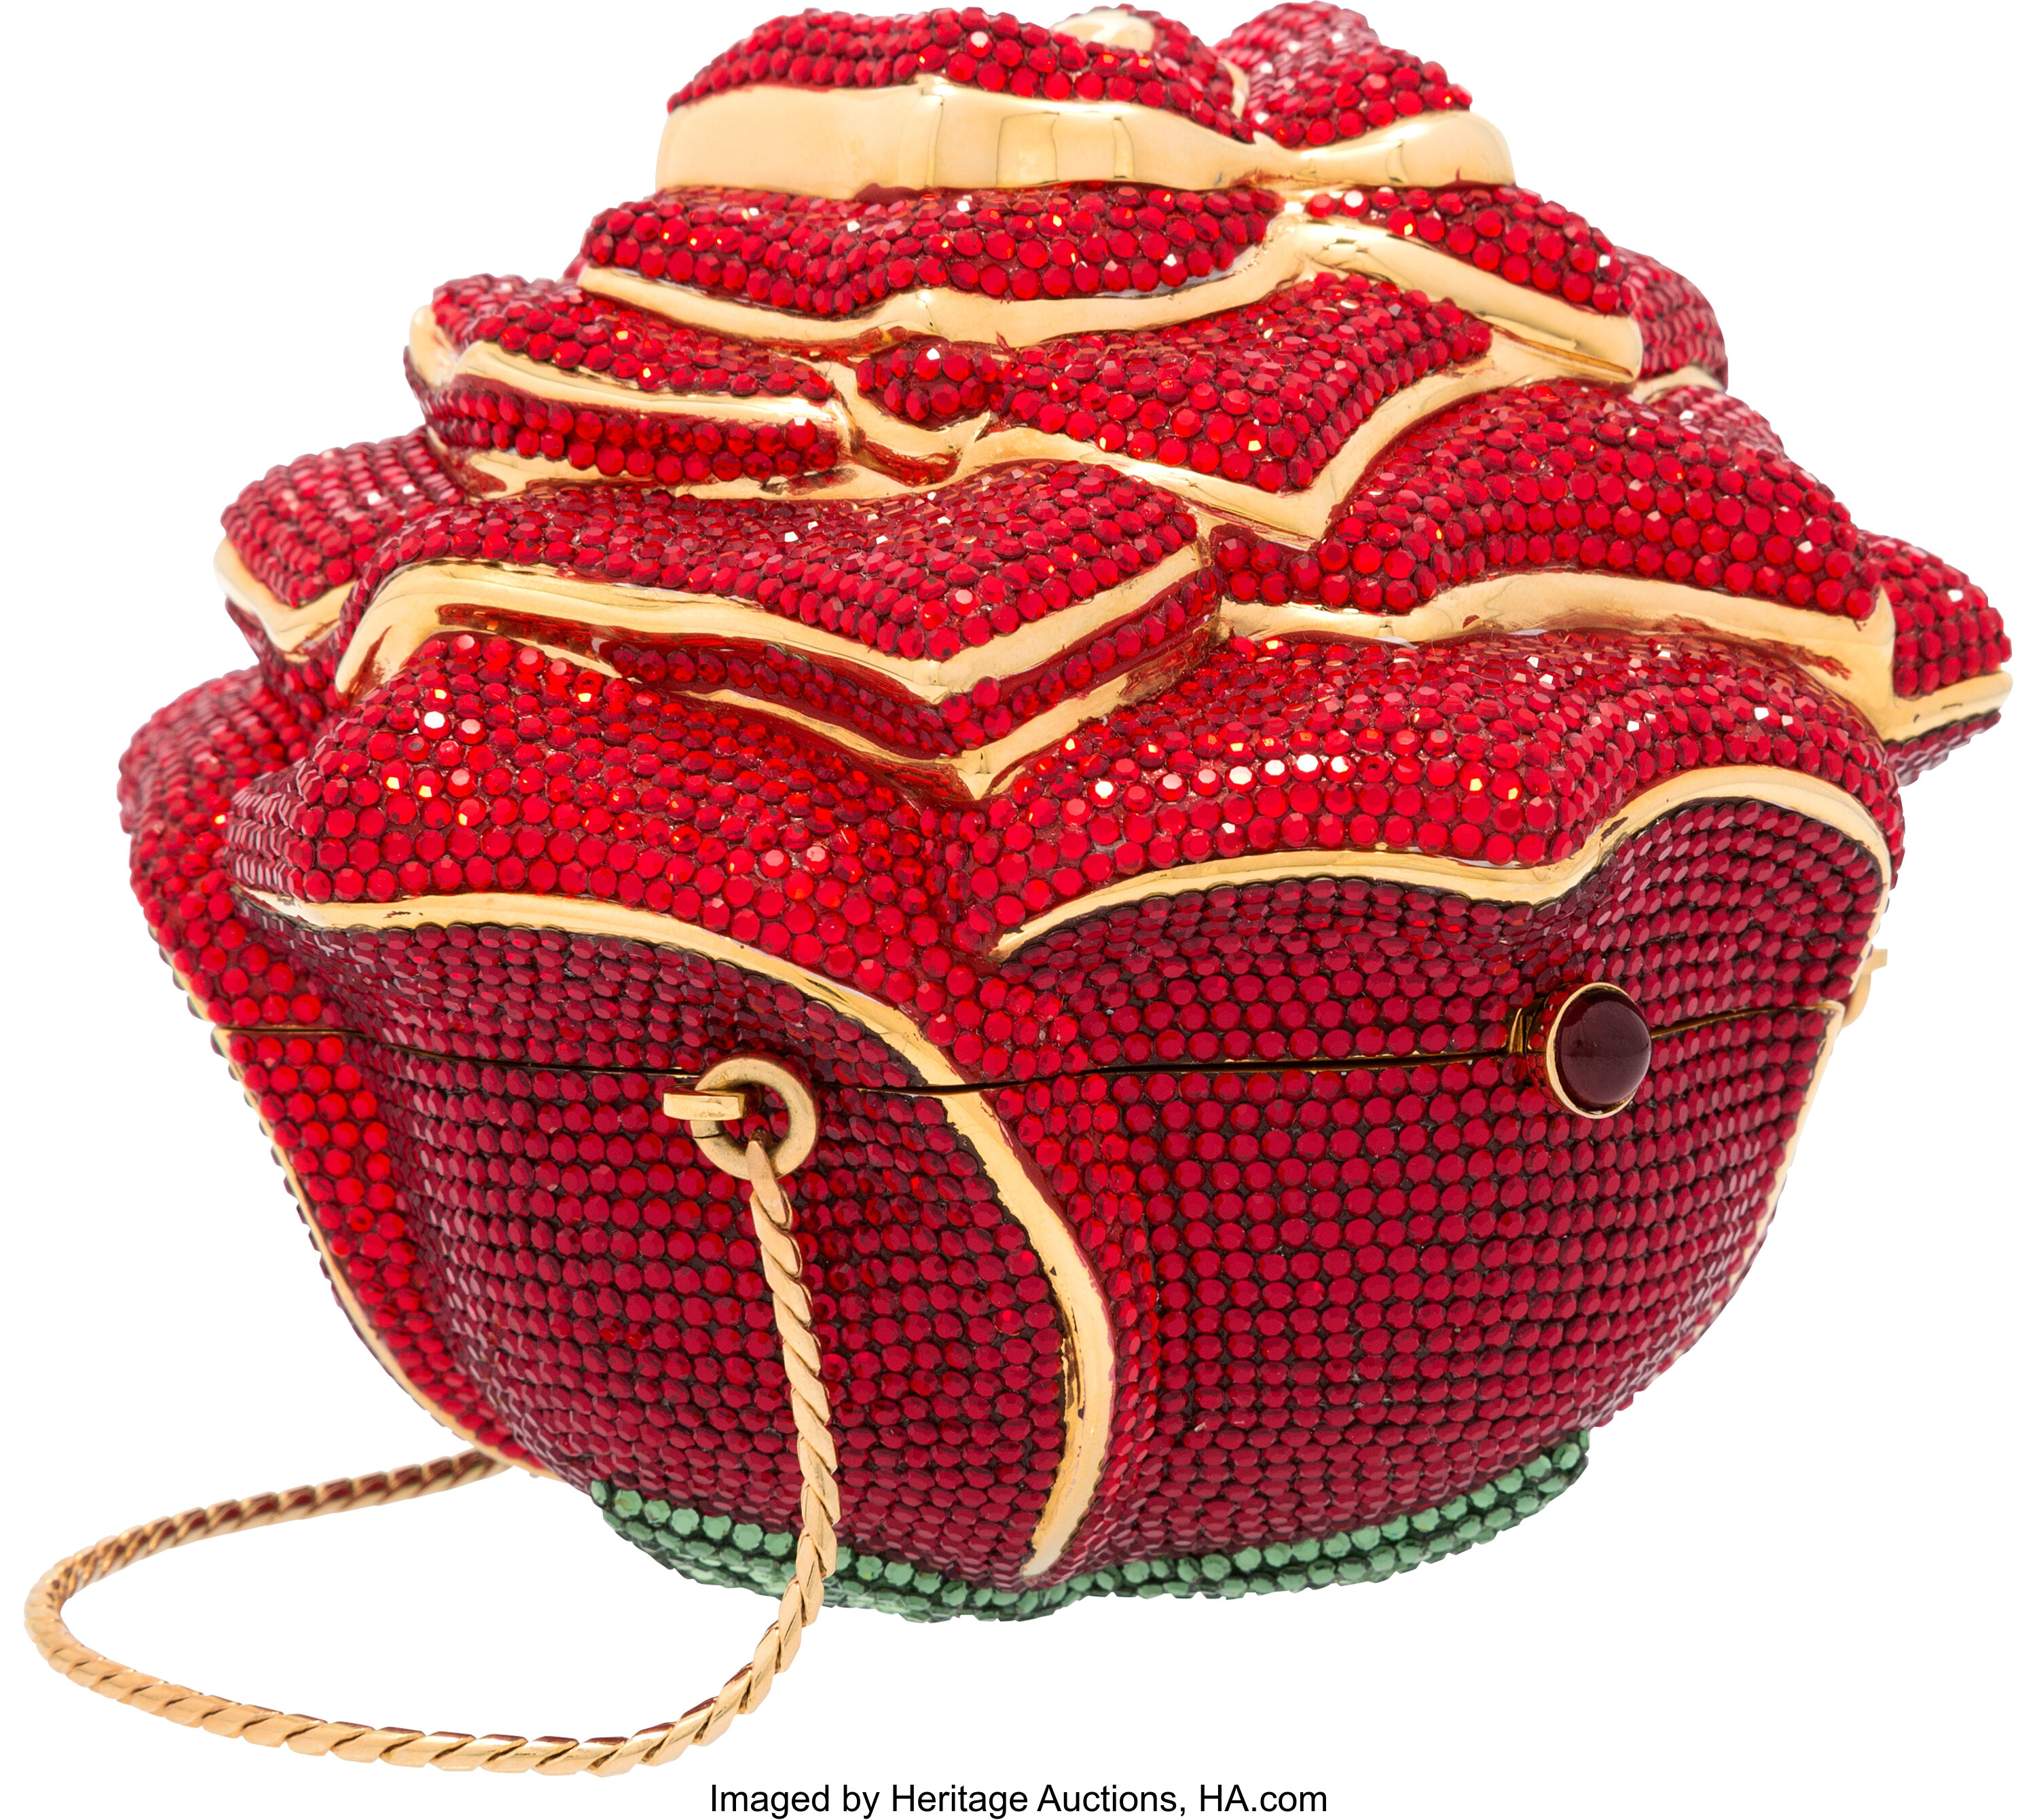 Judith Leiber Fresh Hot French Fries Crystal Minaudiere Clutch Bag Red Pattern